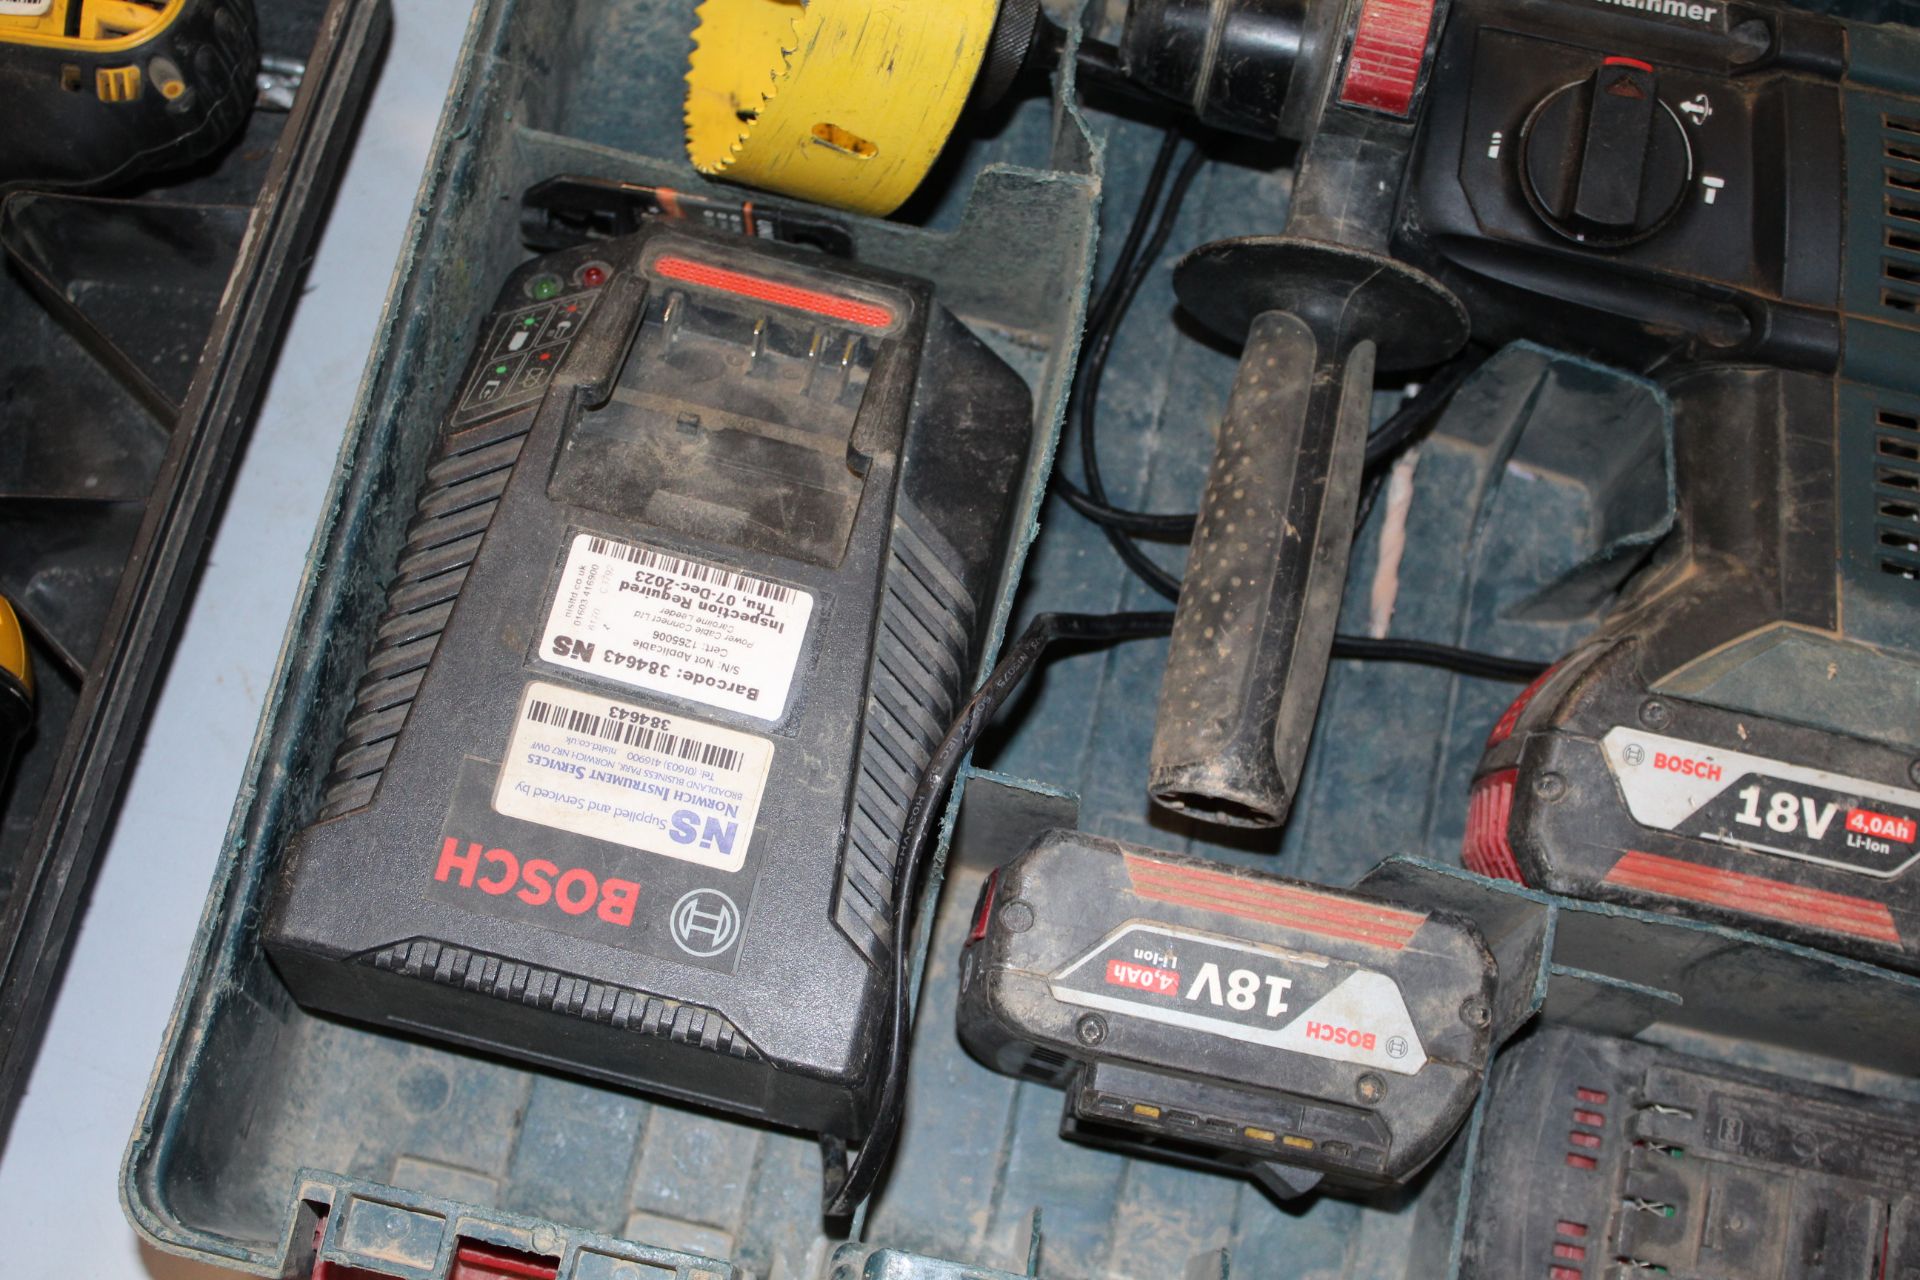 Bosch 18v professional cordless hammer drill with 4x batteries and charger in case. V CAMPSEA ASHE - Image 3 of 6